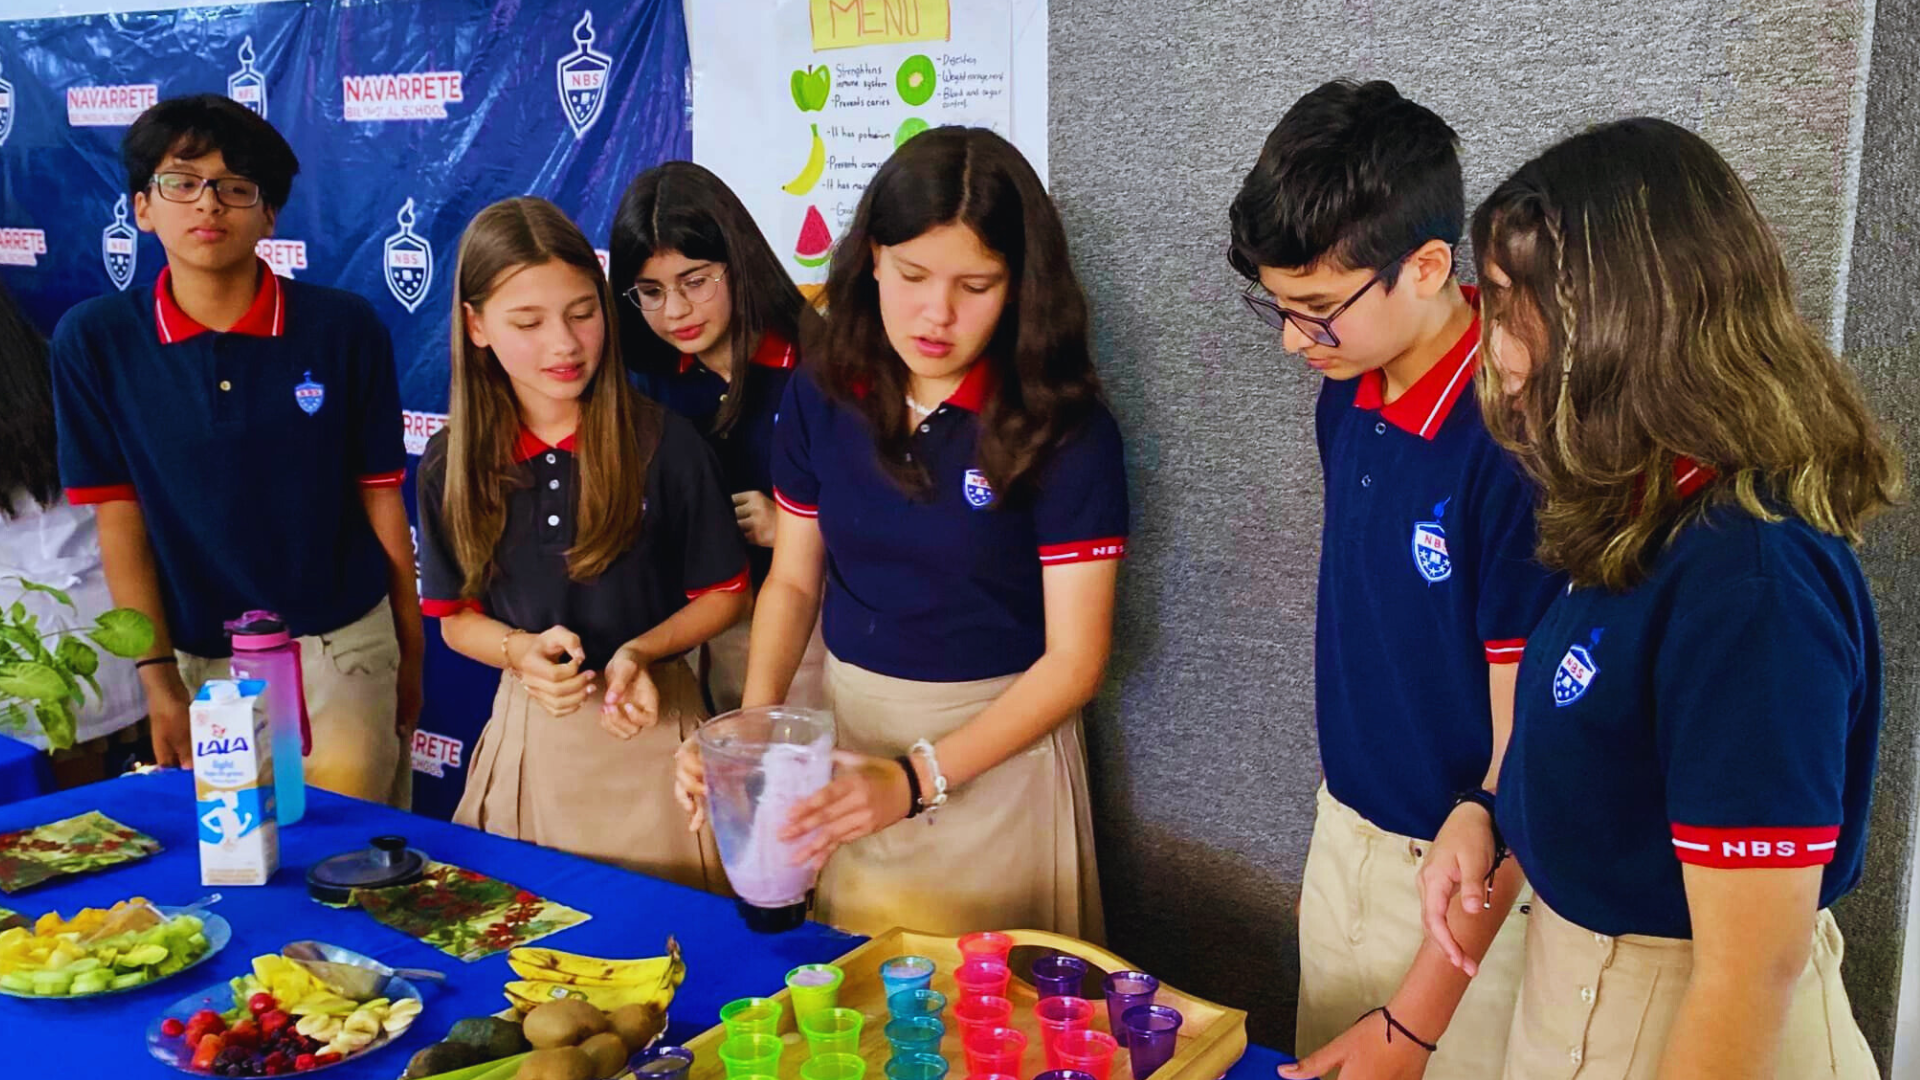 NBS Wellness Fair | A Project by Middle School Students